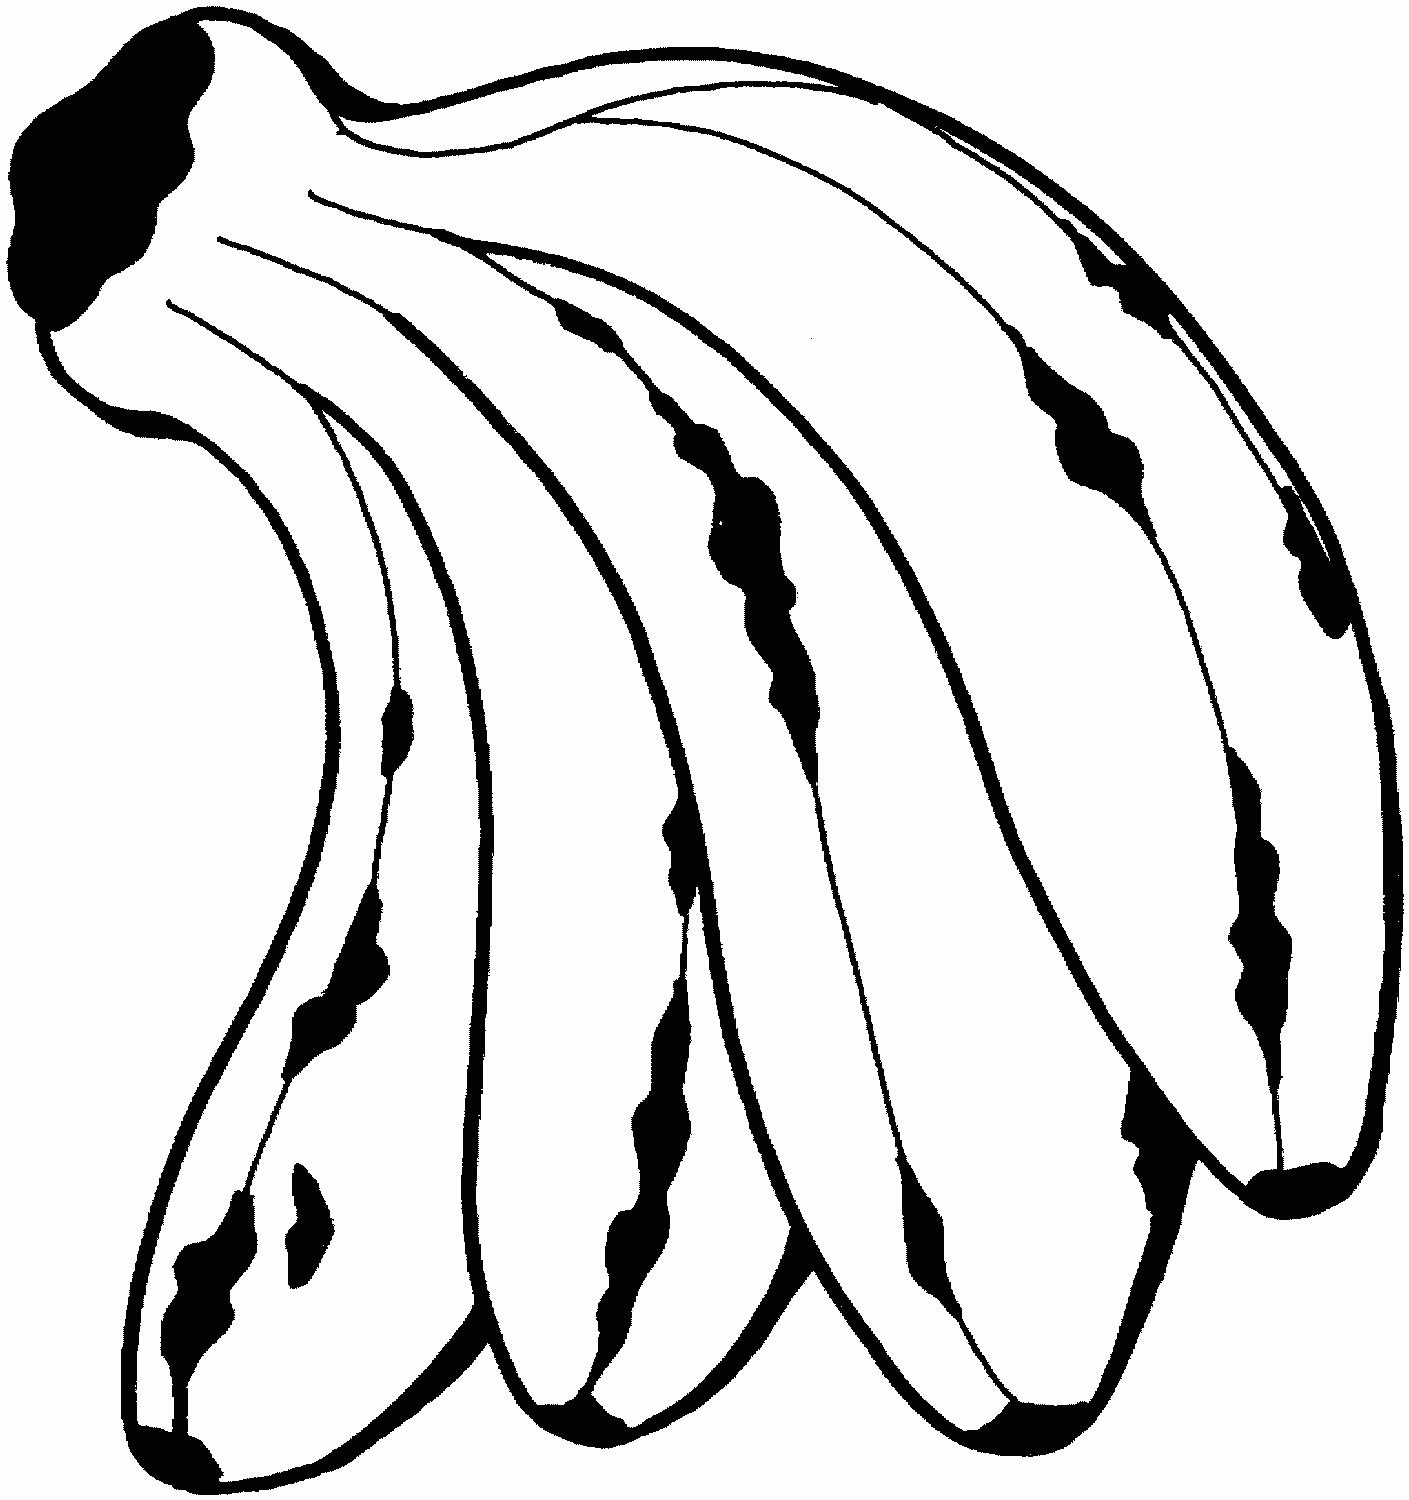 Bunch Of Bananas Coloring Page Colouringpages